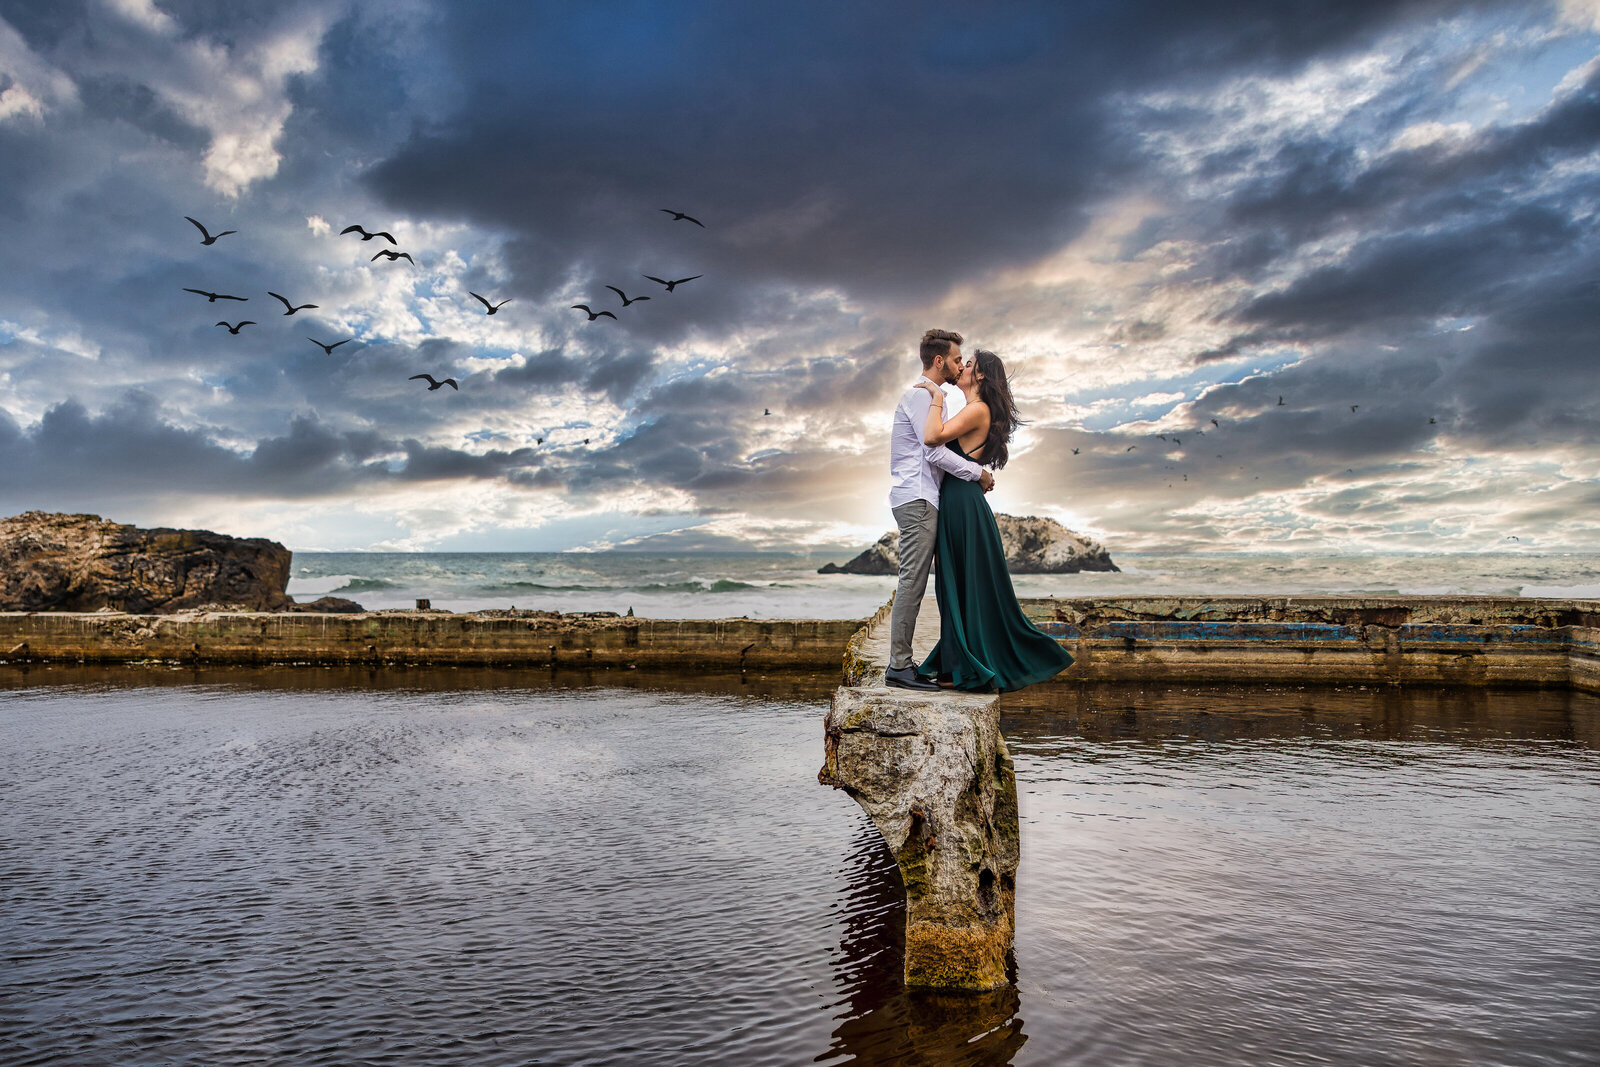 Sacramento wedding photography studio captures engaged couple kissing on a ledge in front of the san francisco bay.